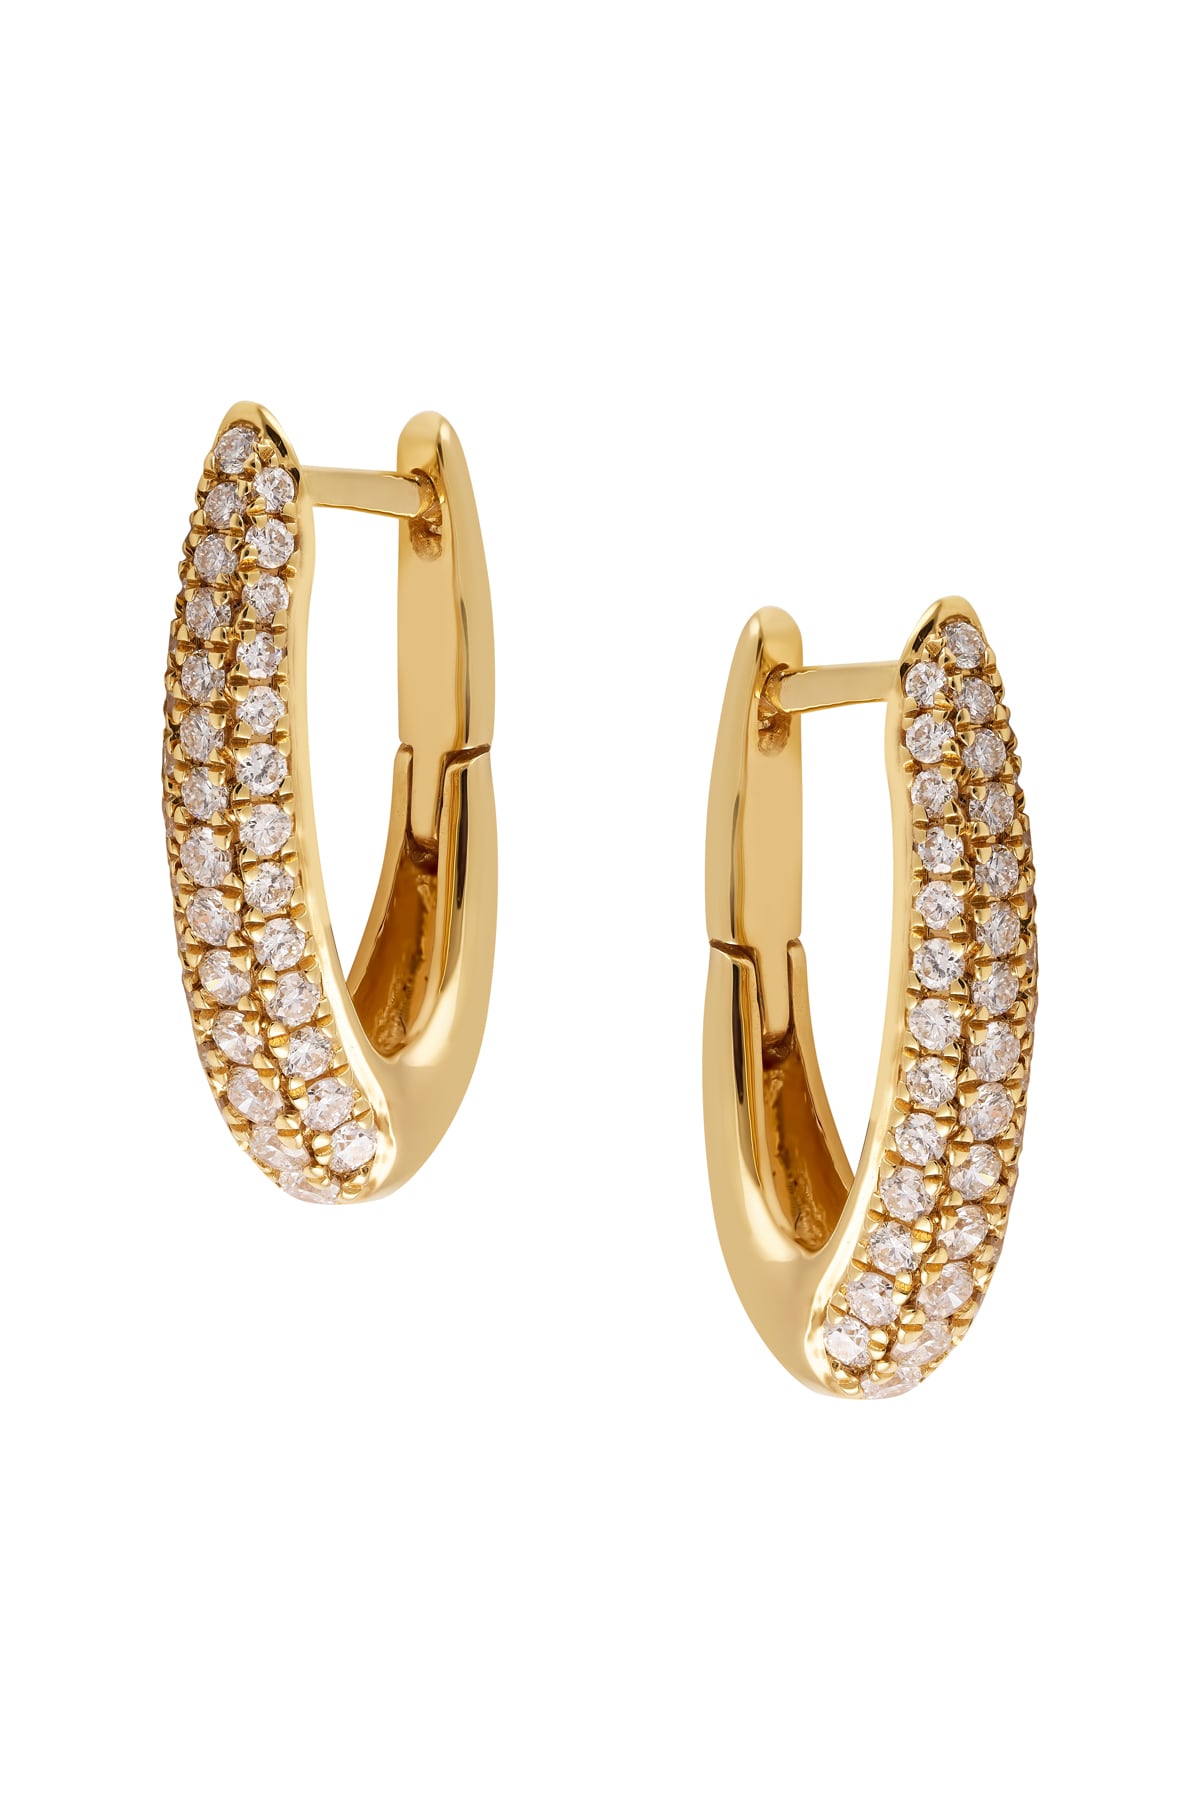 Diamond Set Oval Pave Style Huggie Earrings In Yellow Gold from LeGassick Jewellery.